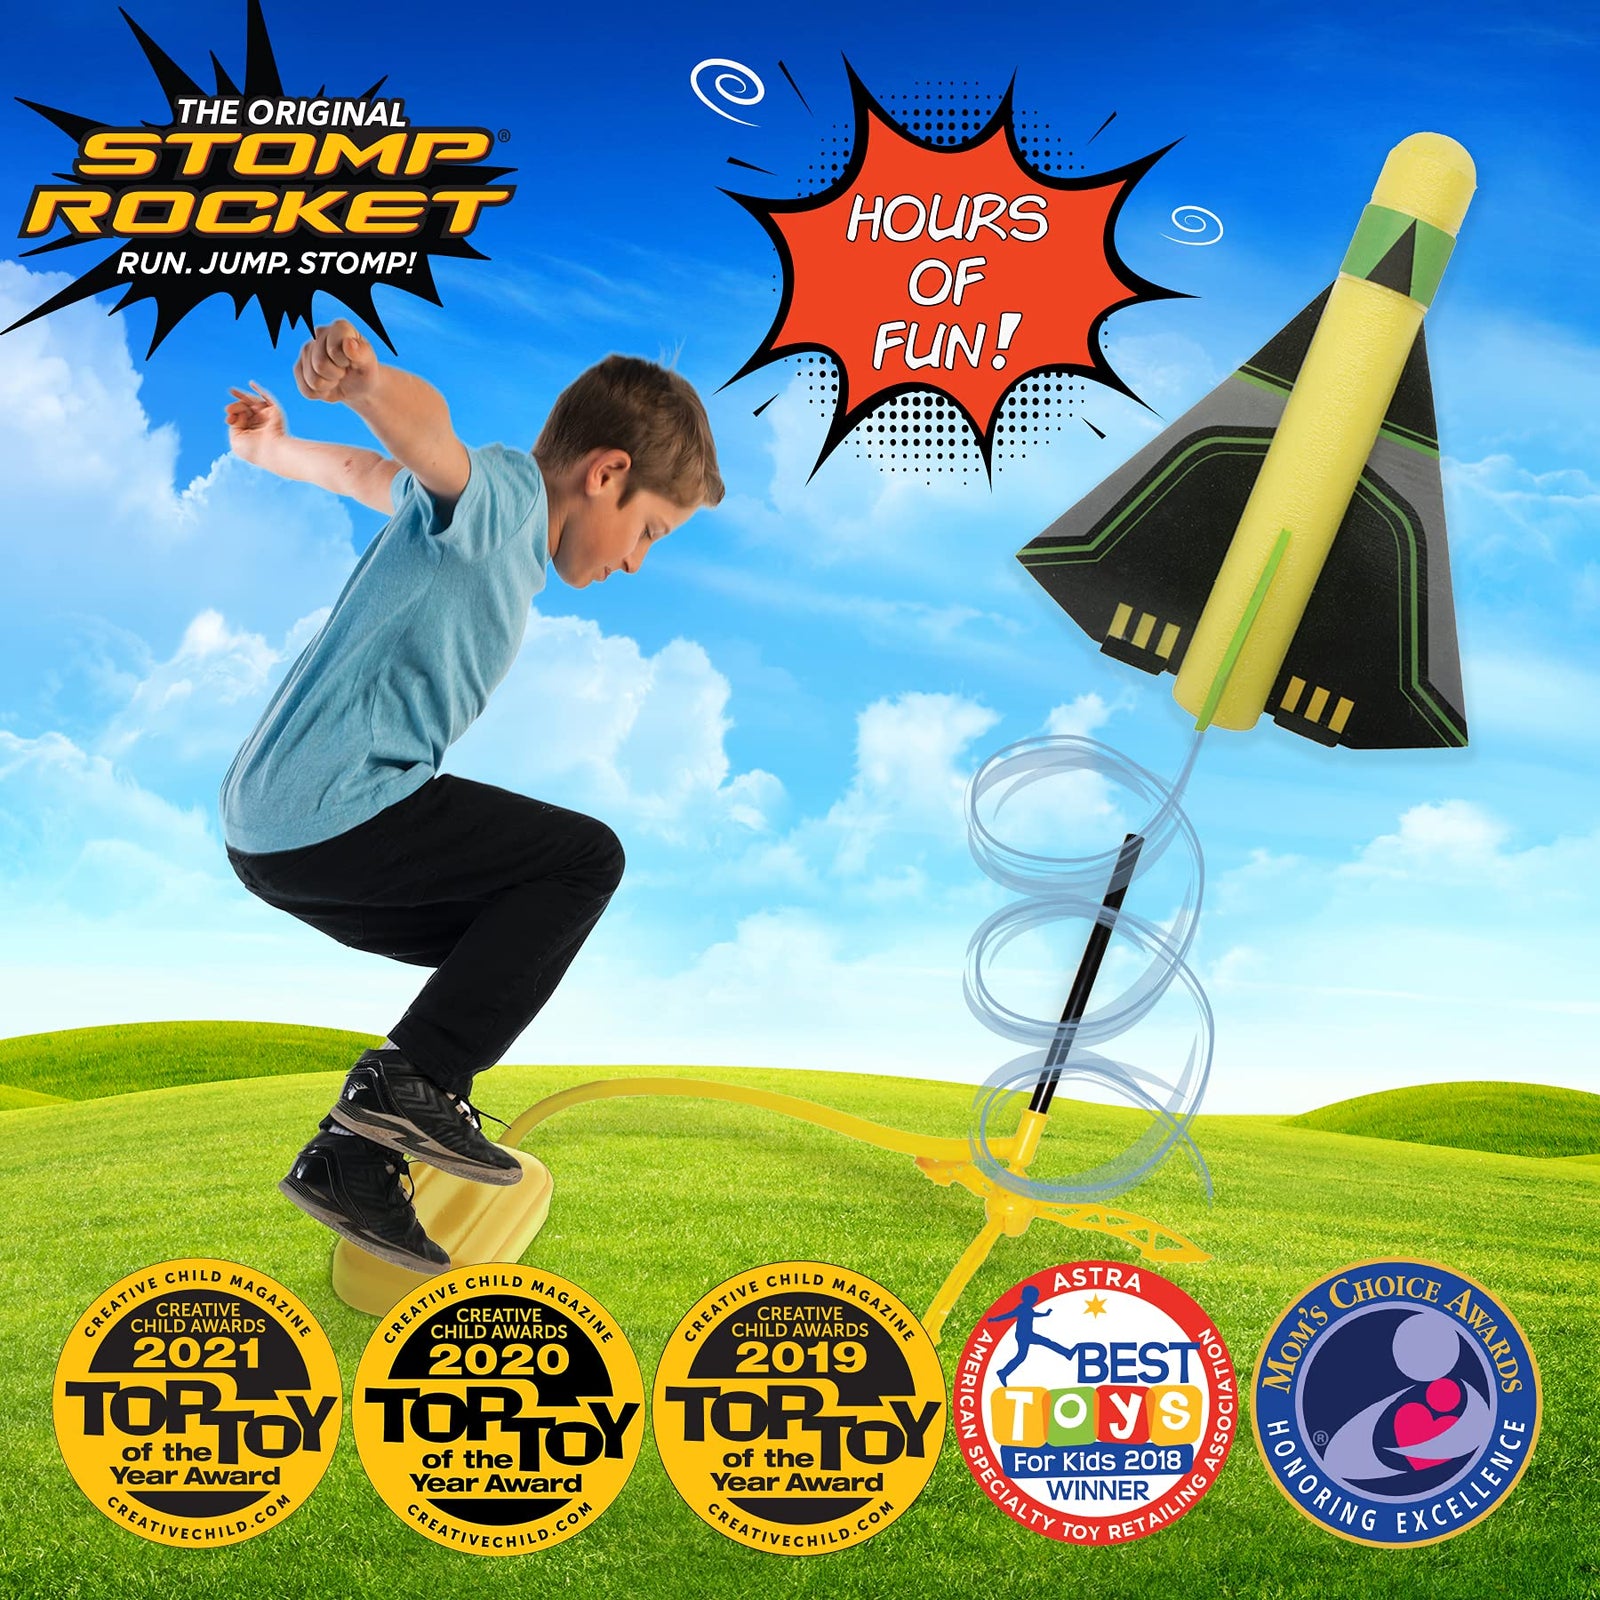 The Original Stomp Rocket Stunt Planes Launcher - 3 Foam Planes and Toy Air Rocket Launcher - Outdoor Rocket STEM Gifts for Boys and Girls - Ages 5 (6, 7, 8) and Up - Great for Outdoor Play